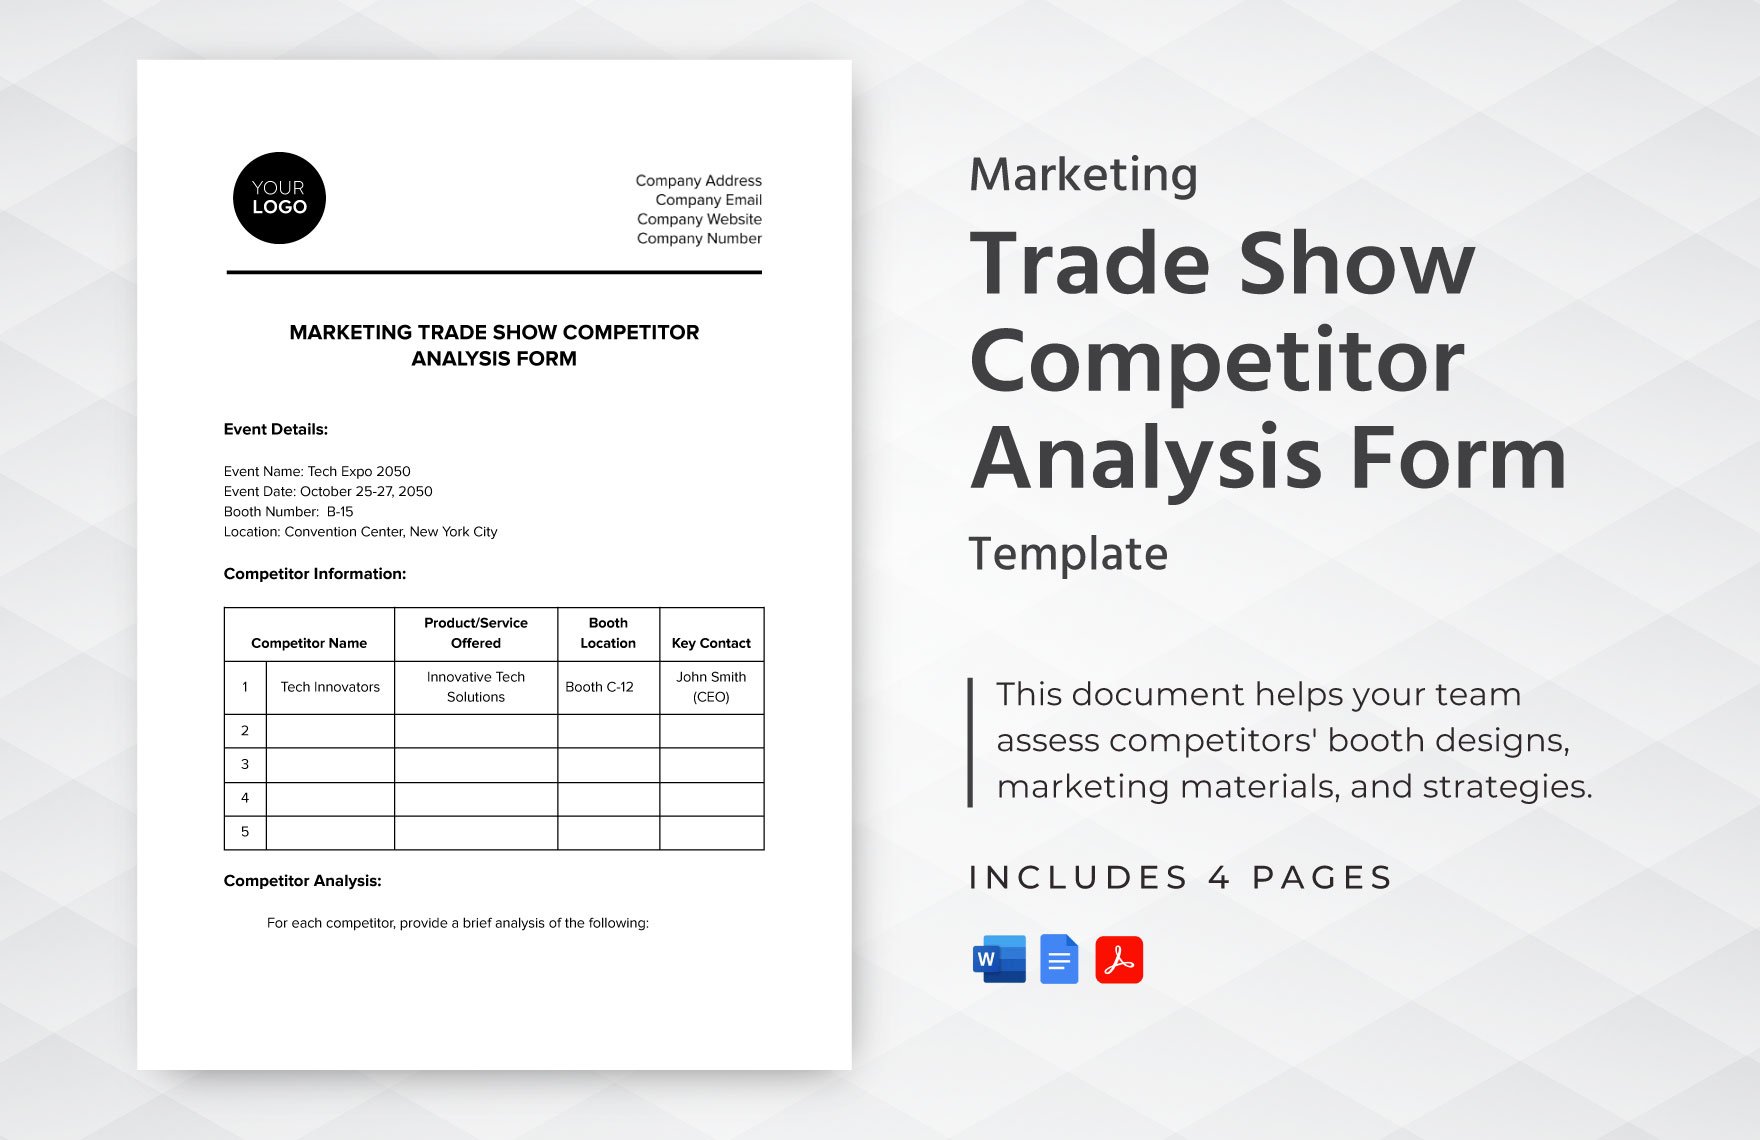 Marketing Trade Show Competitor Analysis Form Template in Word, Google Docs, PDF